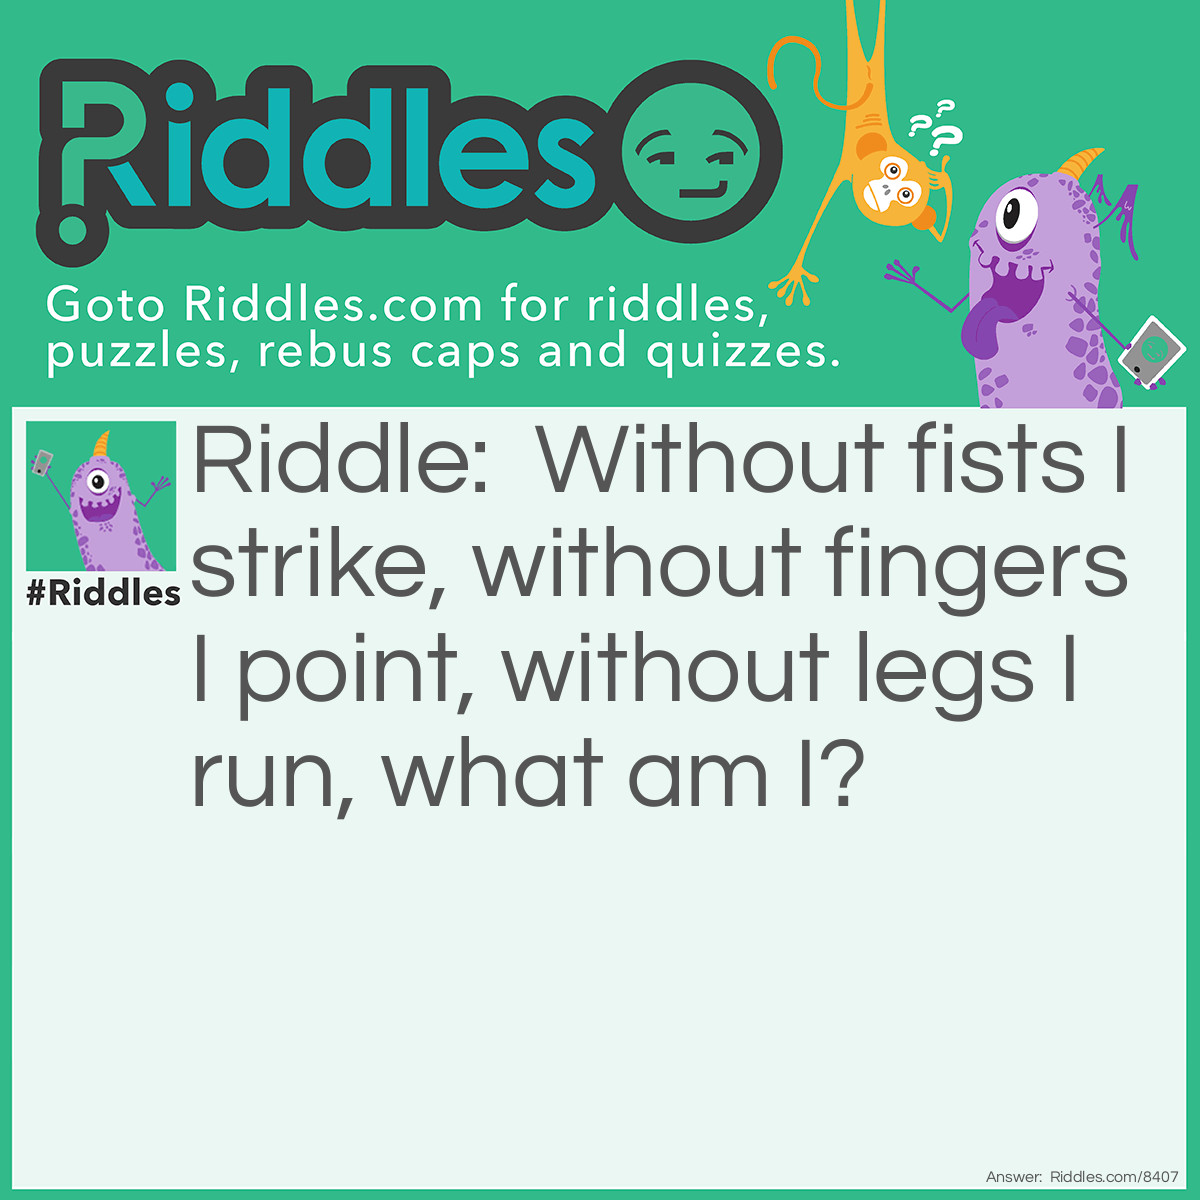 Riddle: Without fists I strike, without fingers I point, without legs I run, what am I? Answer: A clock.